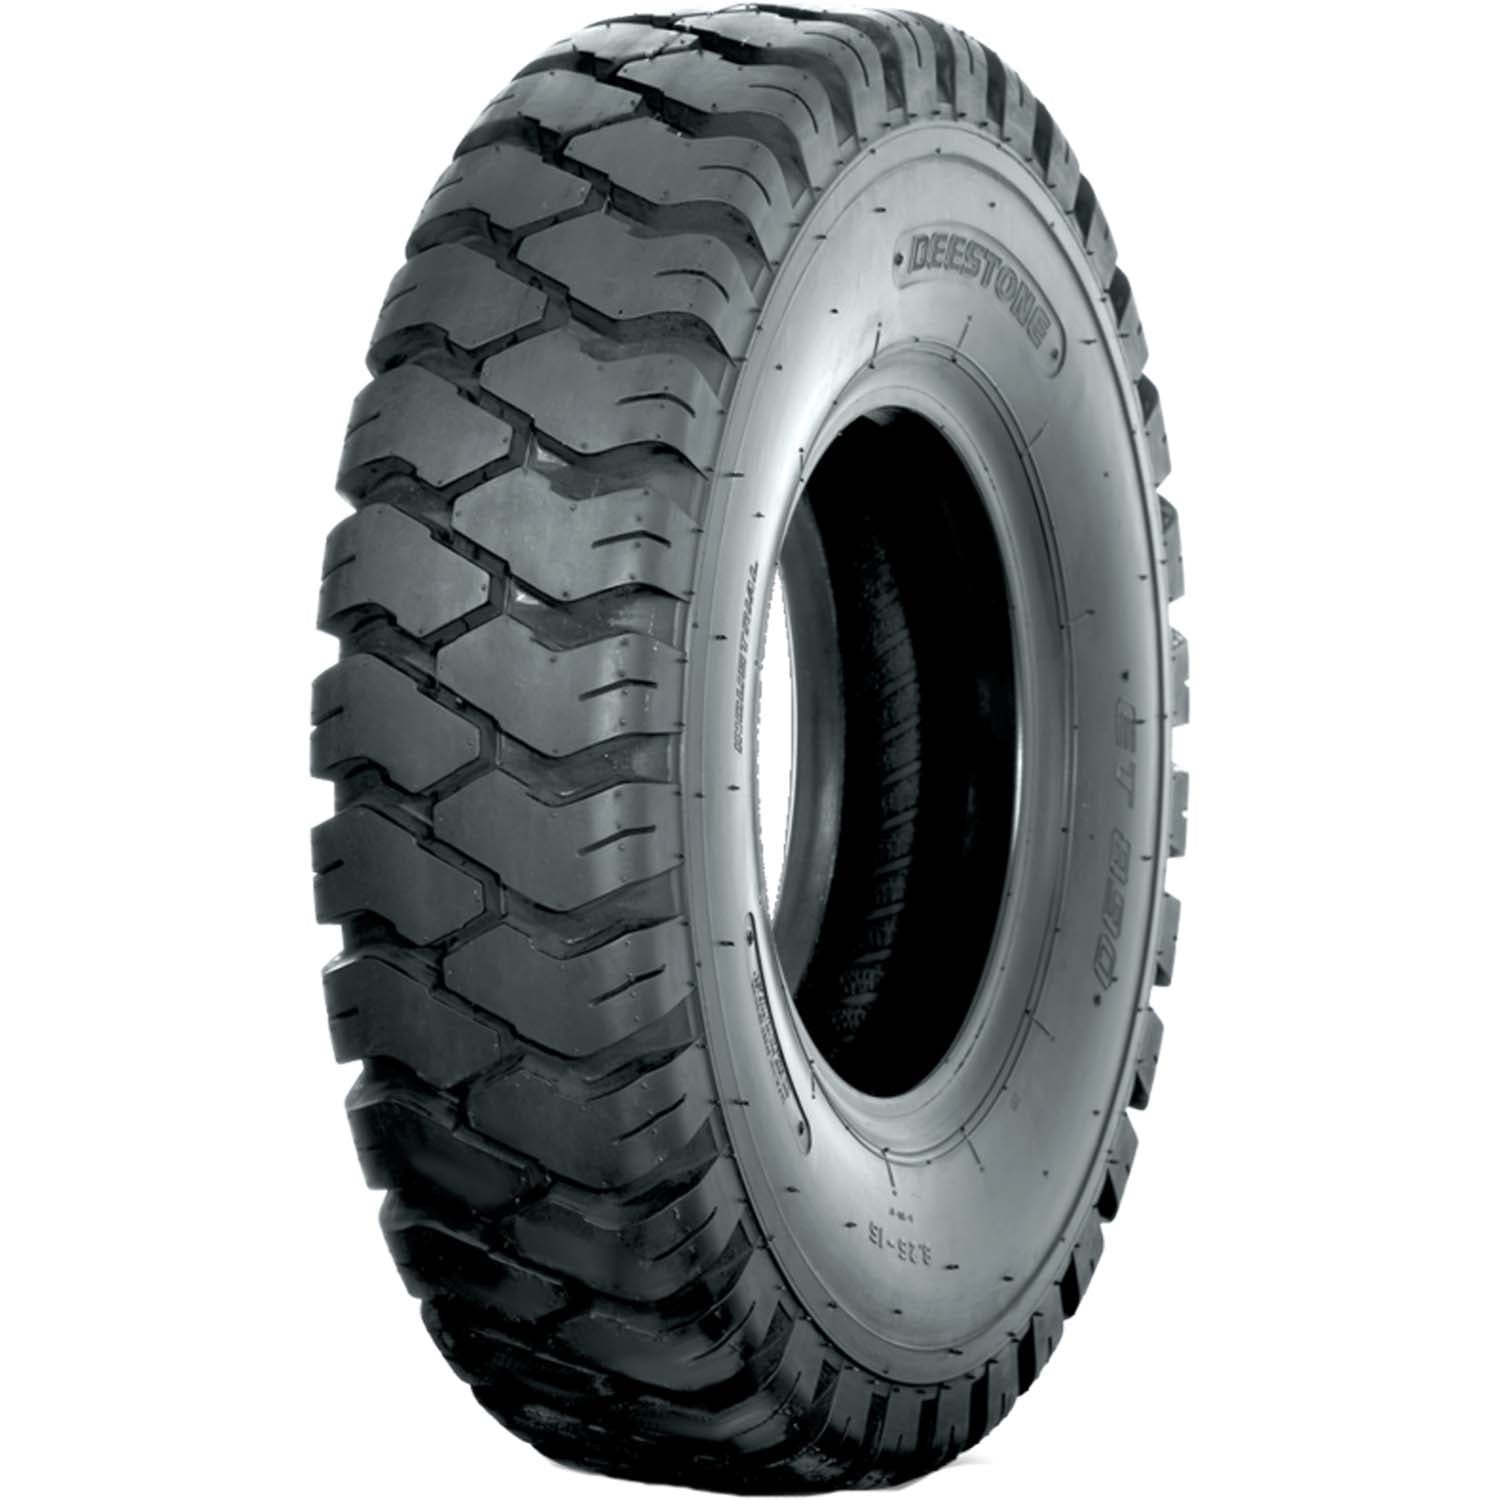 Deestone D301 Forklift Tire With Flap 10ply 6.50-10